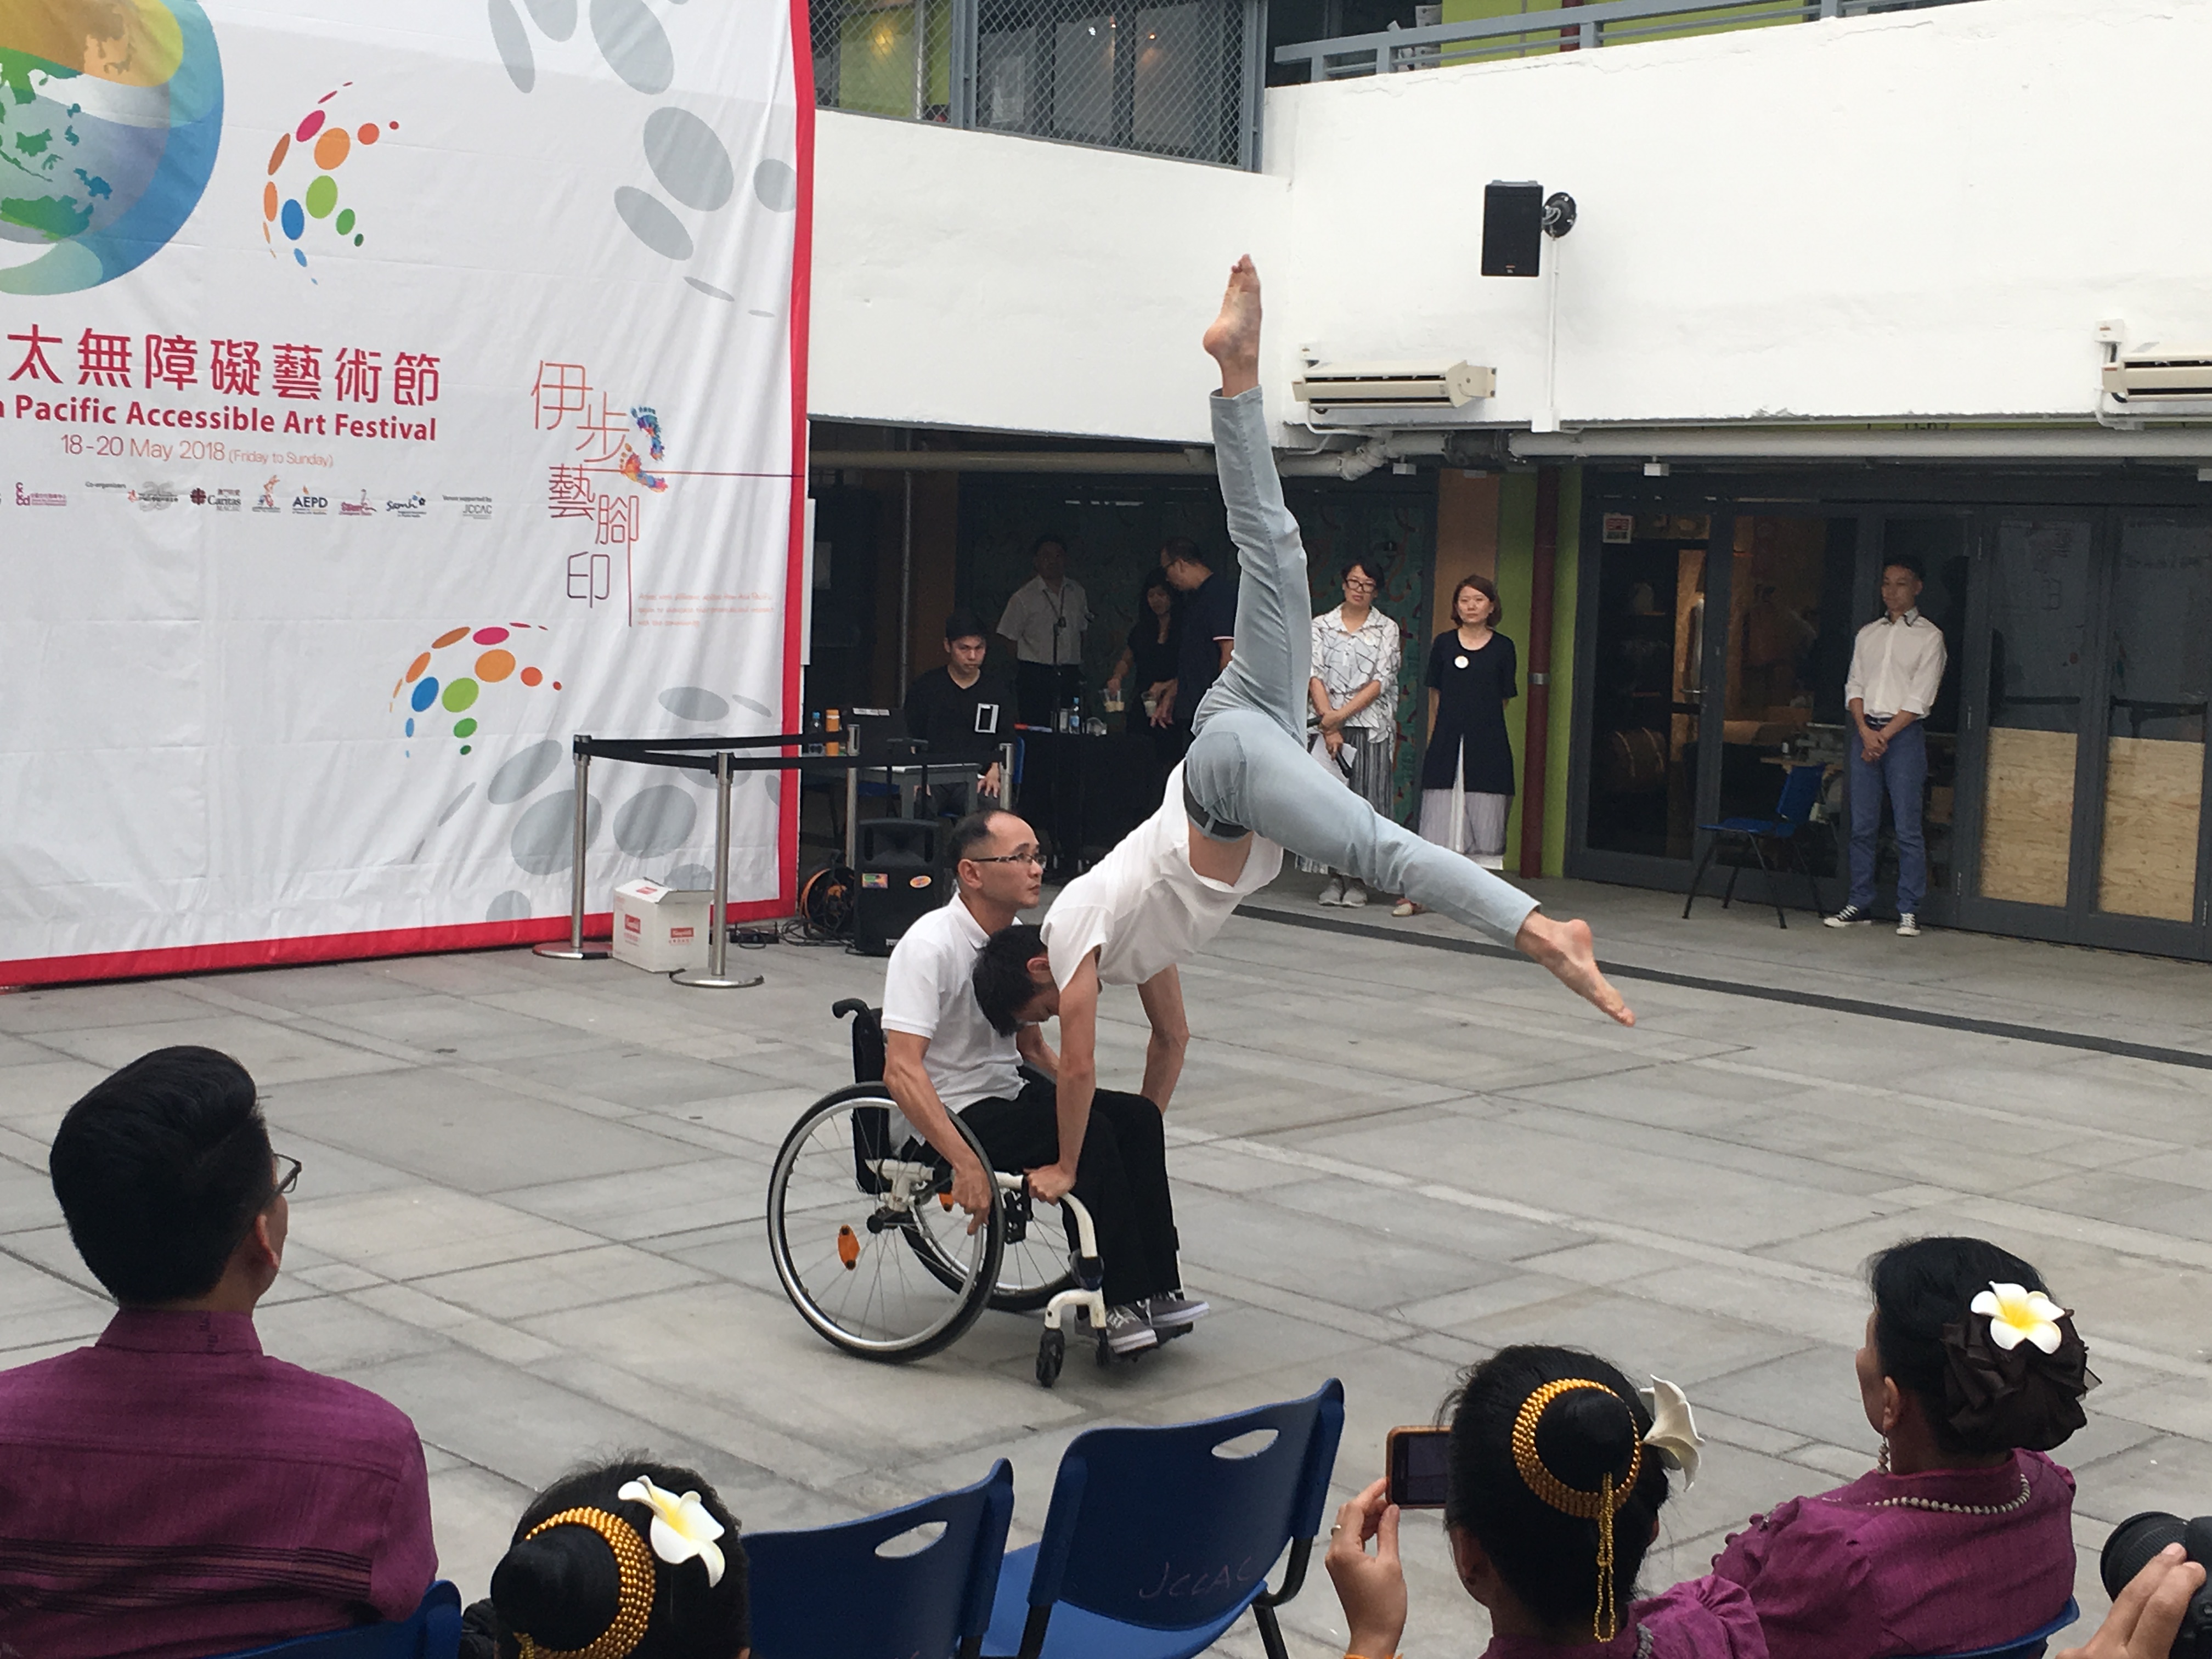 Persons with disabilities was performing at the art center